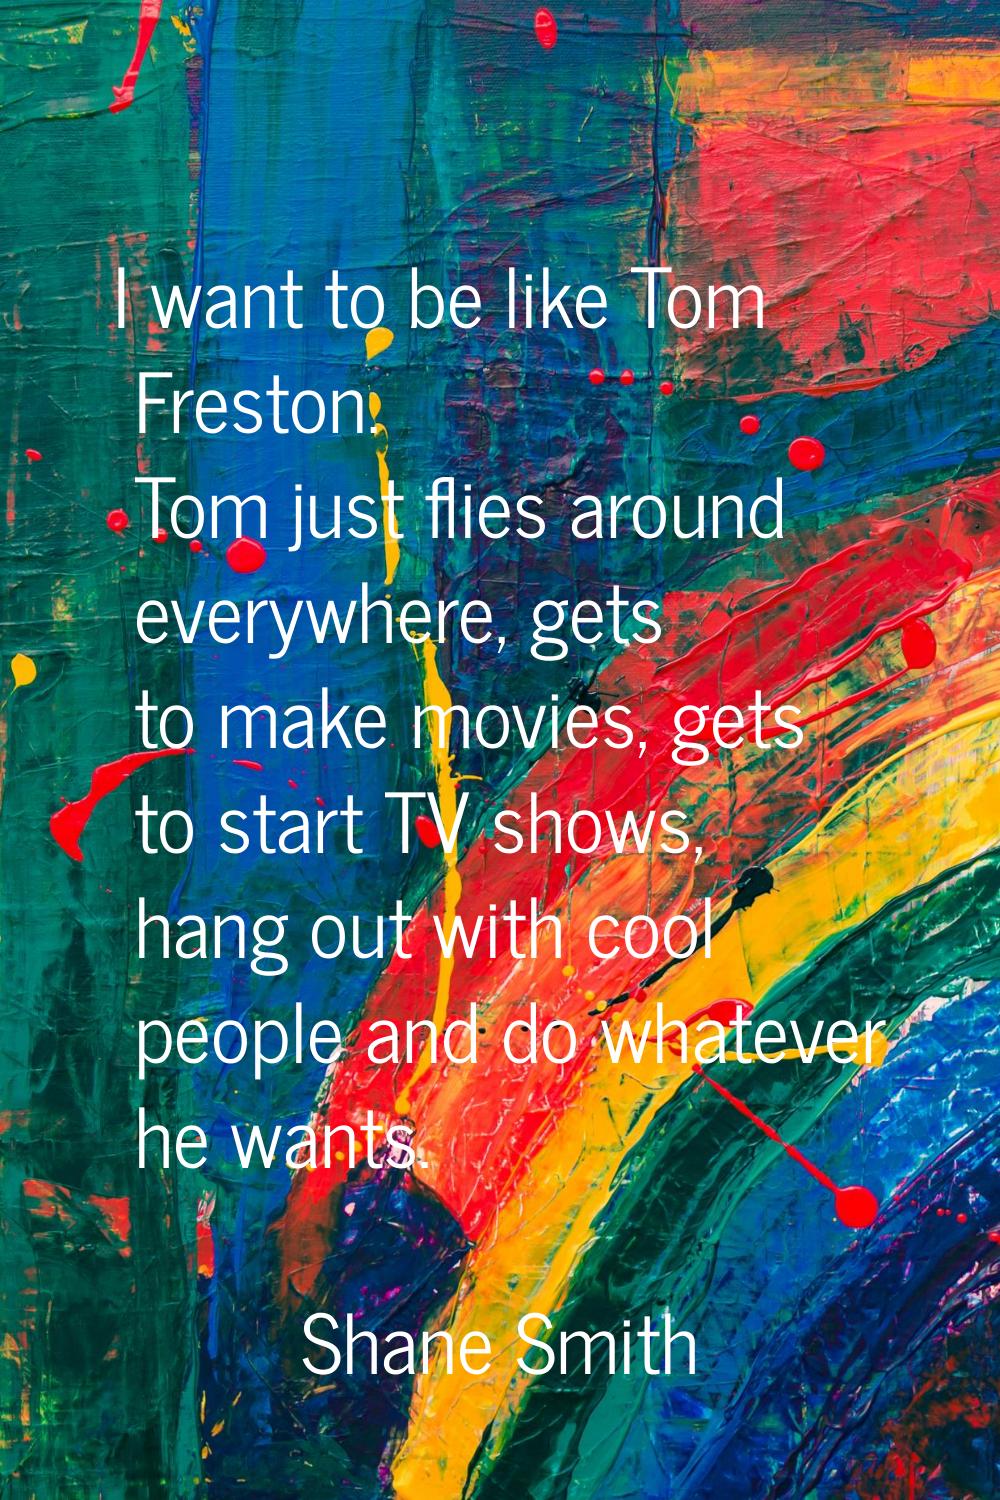 I want to be like Tom Freston. Tom just flies around everywhere, gets to make movies, gets to start